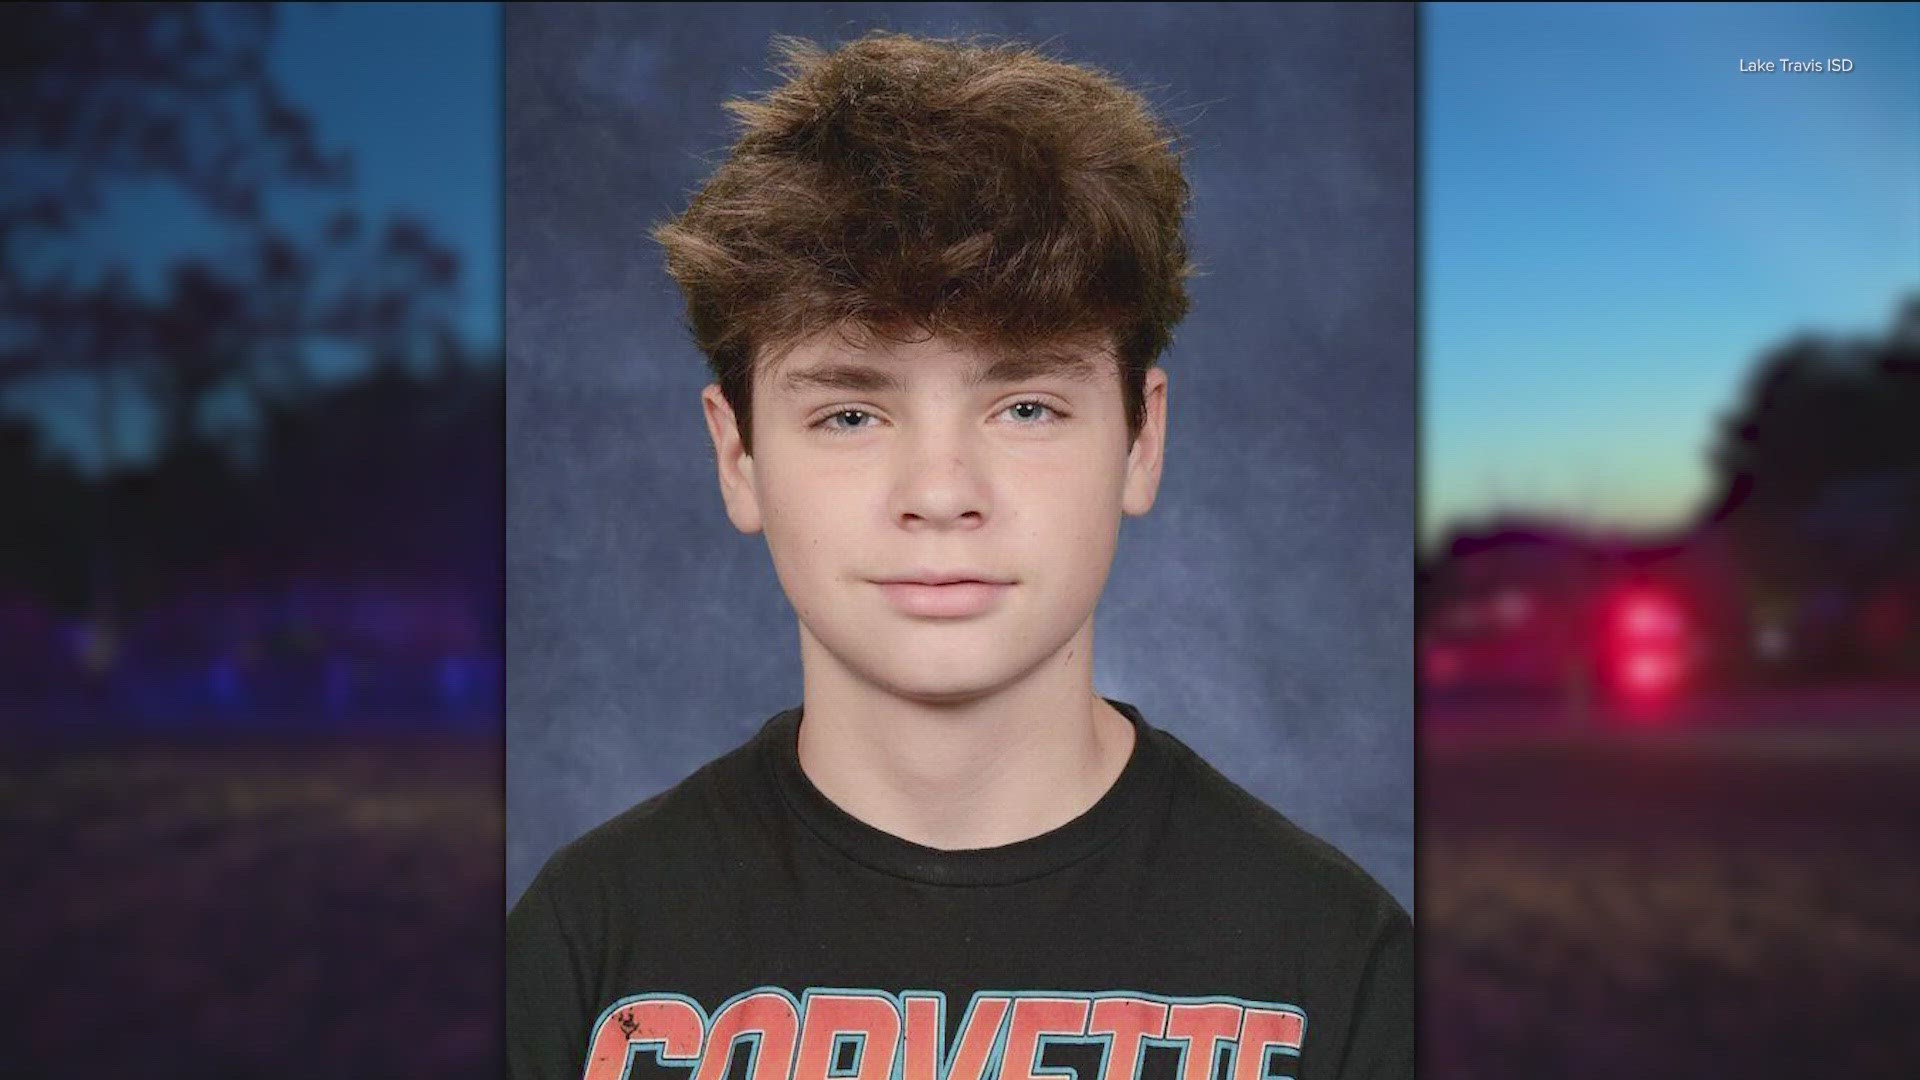 Police have recovered the body of 14-year-old Kaden Forke.